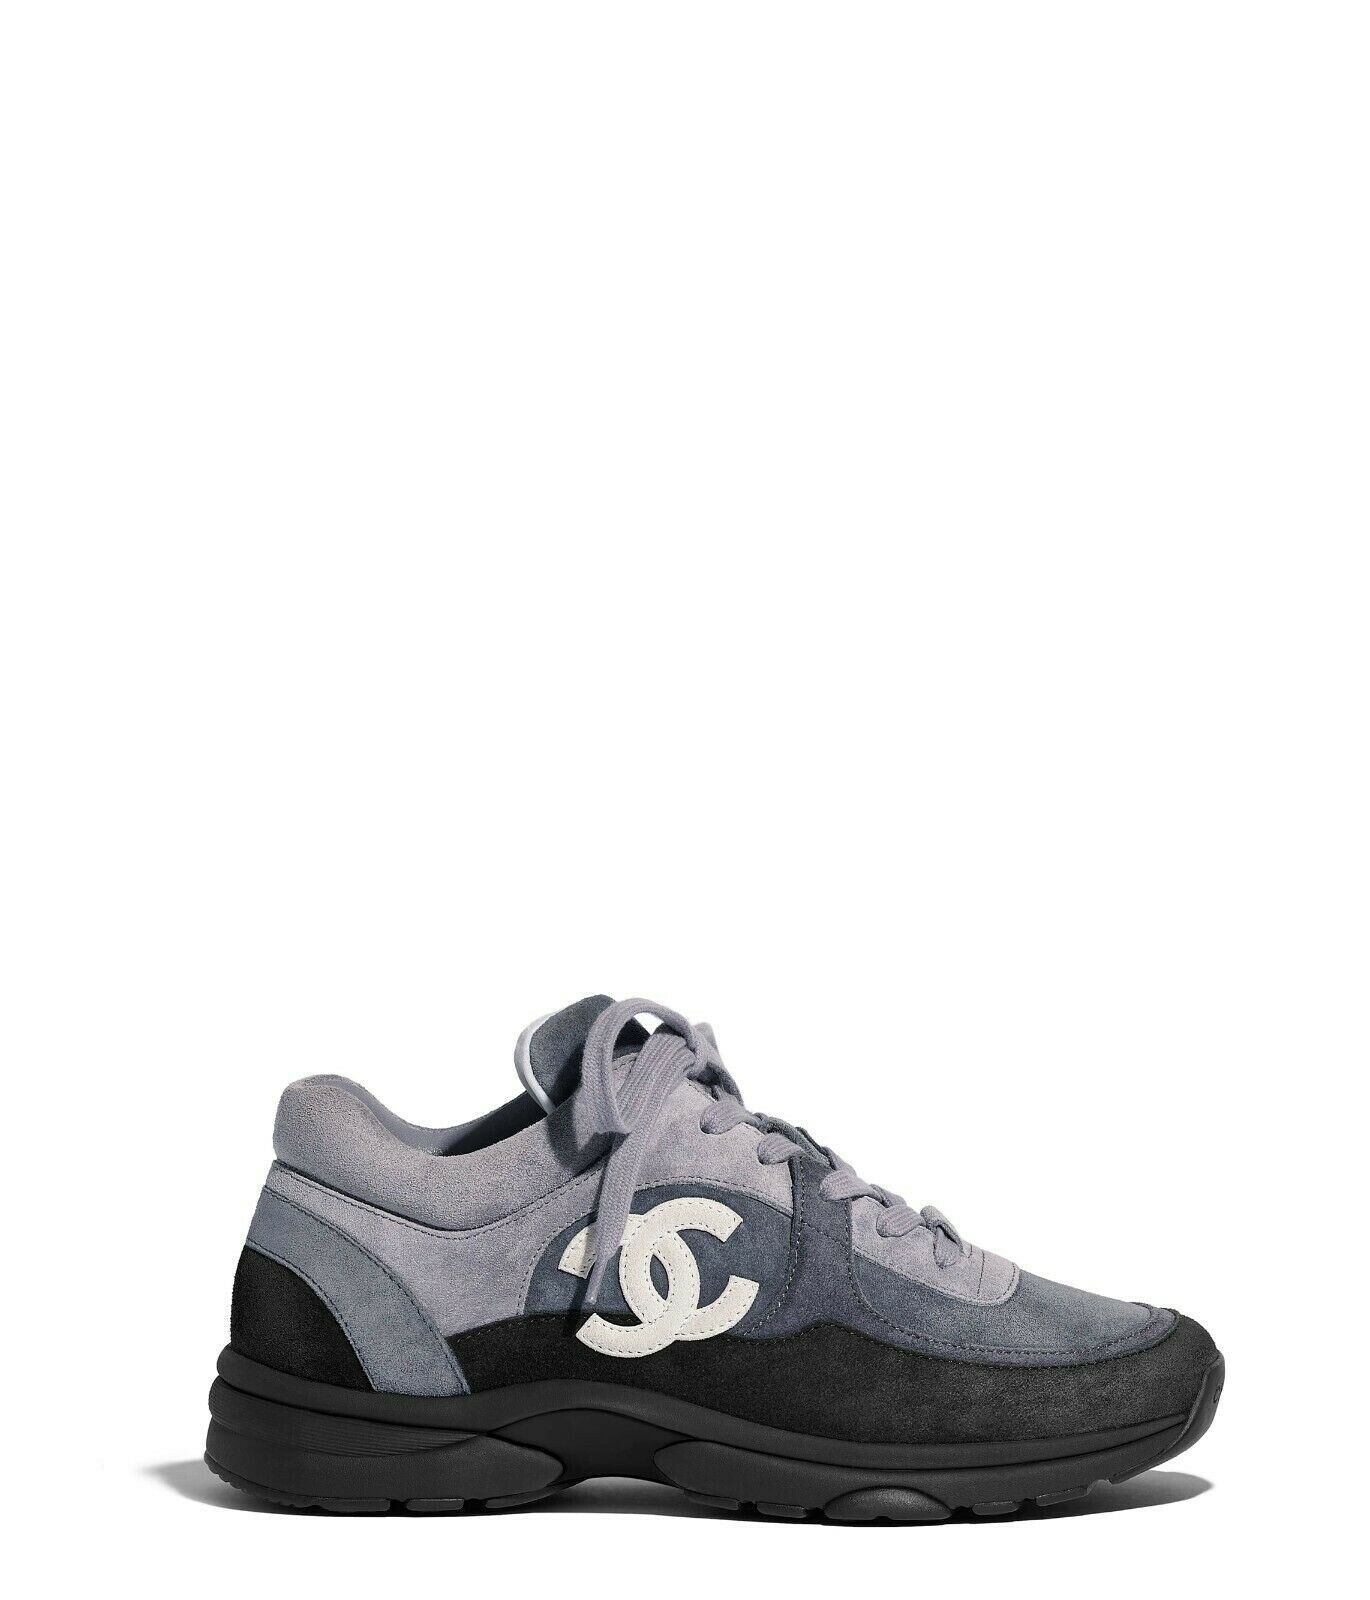 Chanel NEW Chanel CC Race Runner Sneakers 43 Shoes Grey Suede Size US 10 / EU 43 - 1 Preview